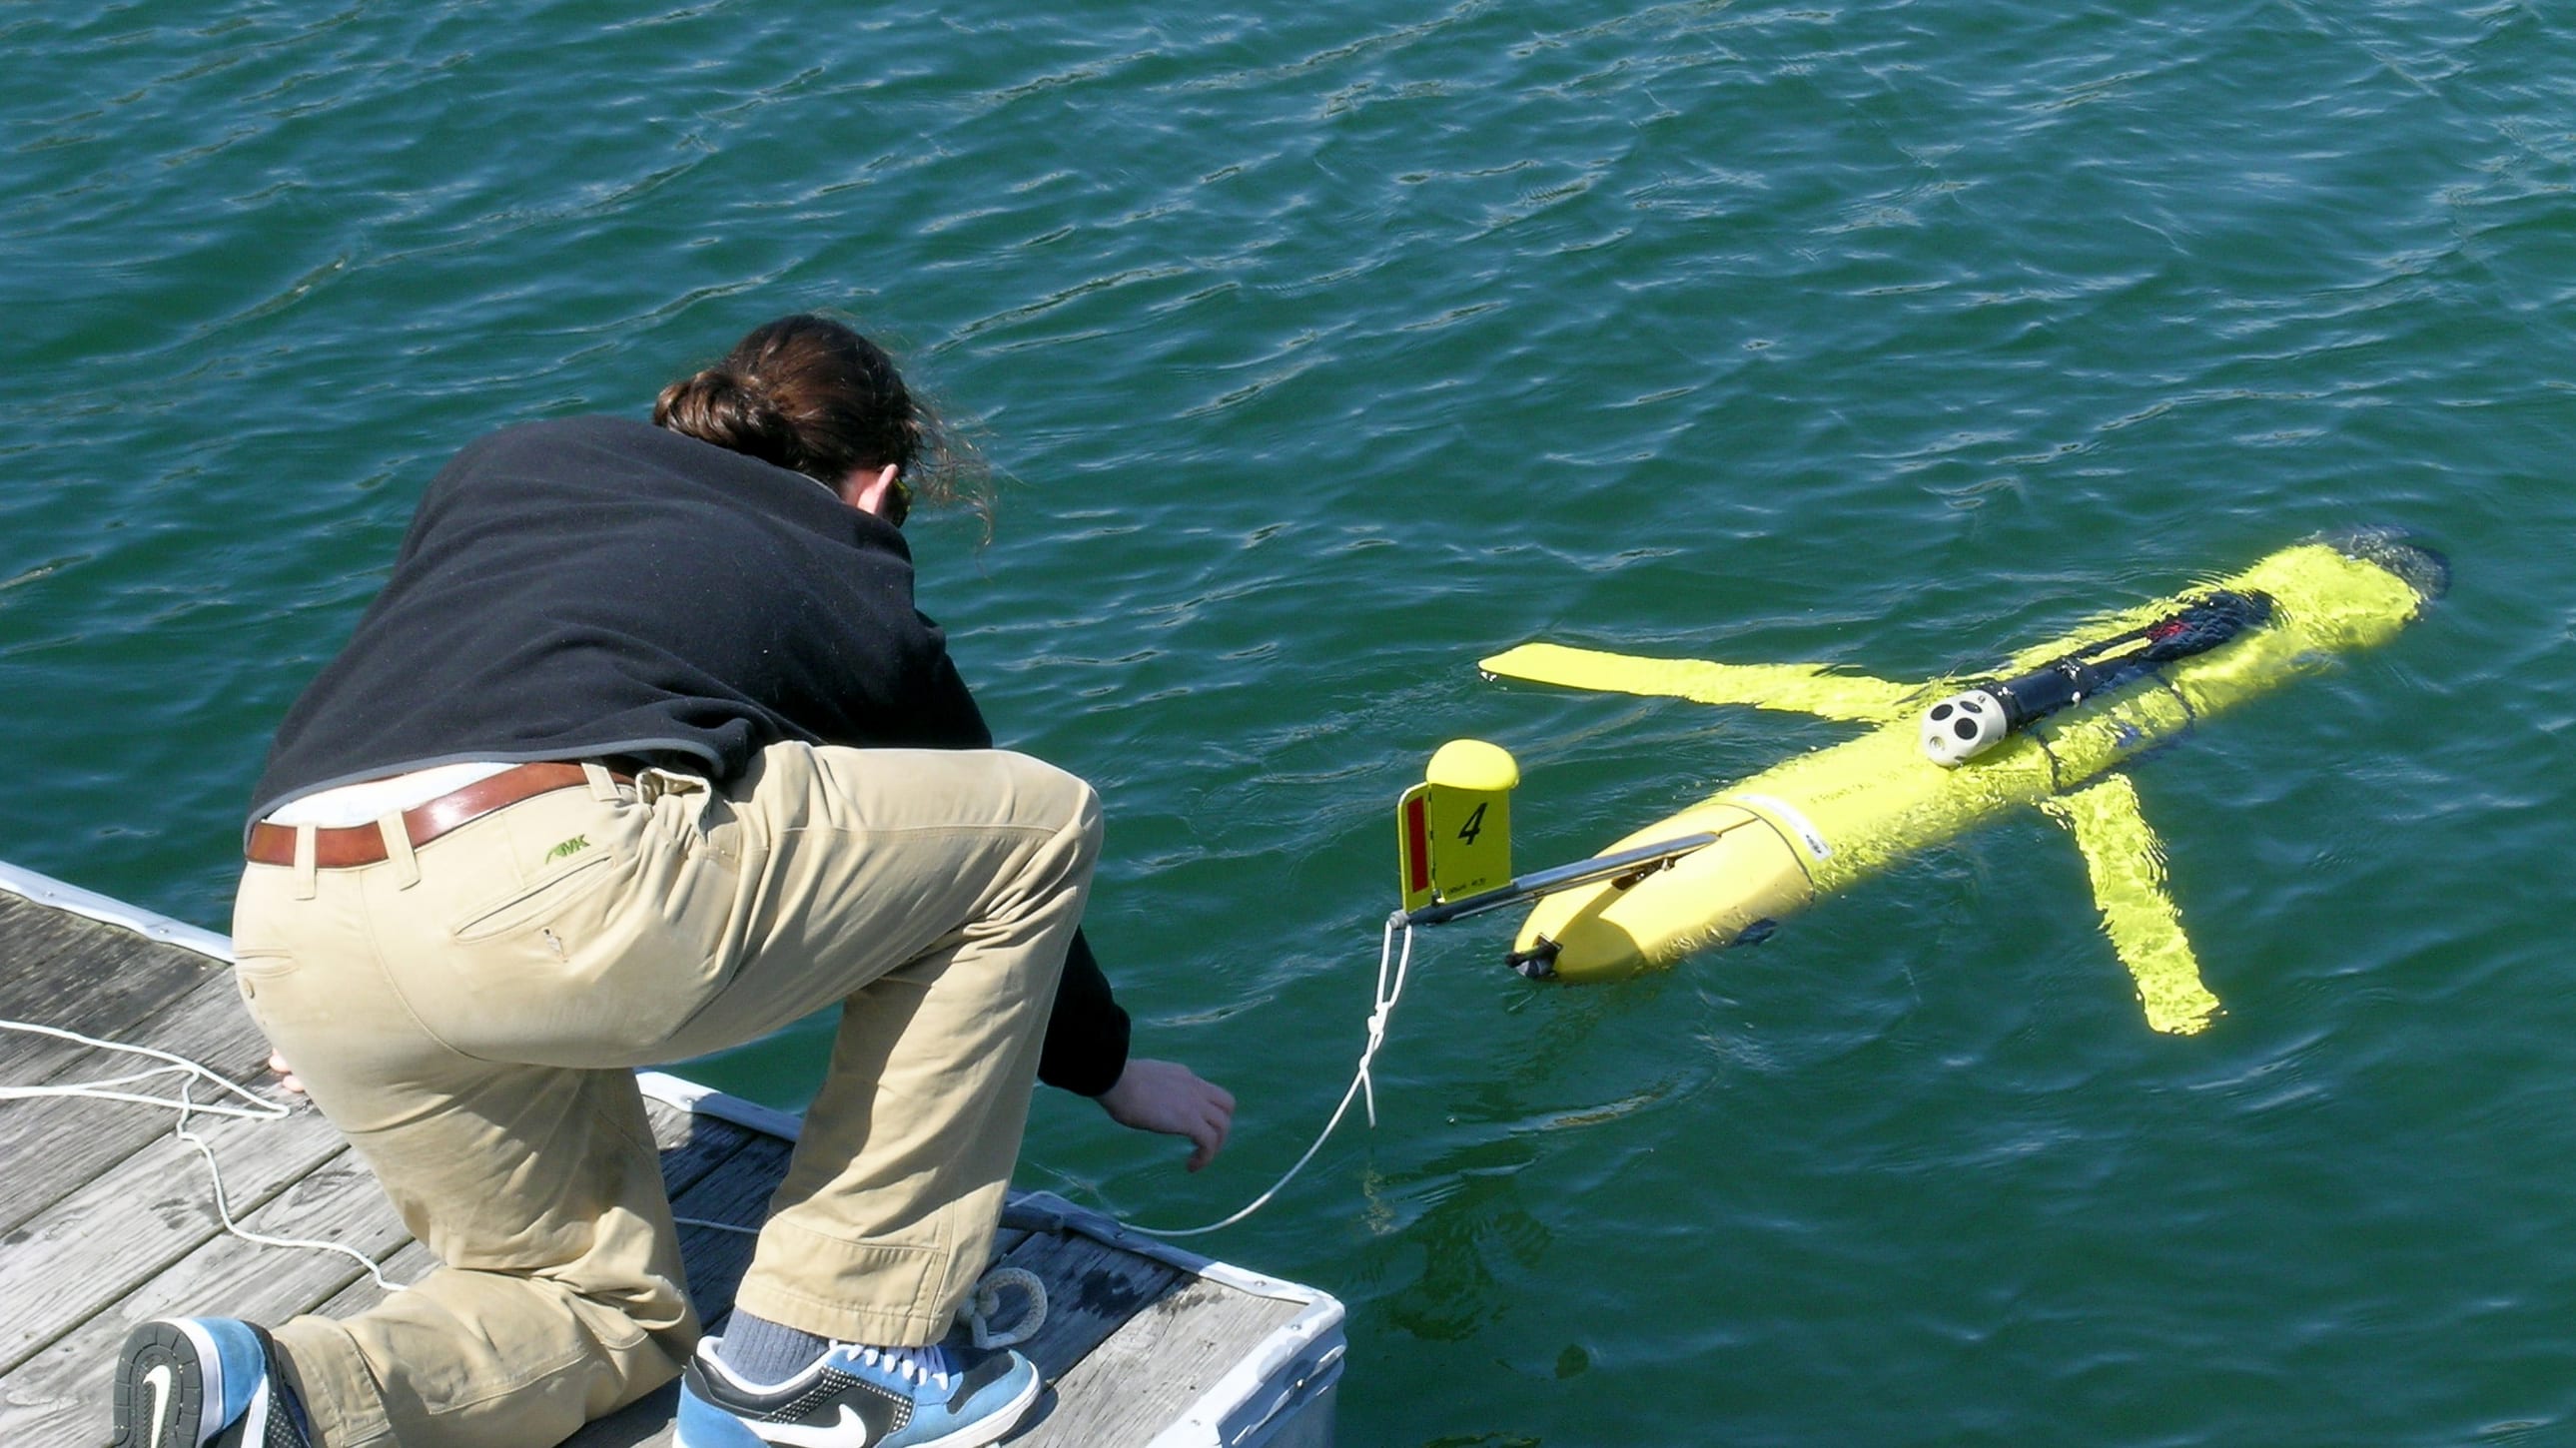 Glider launch from dock